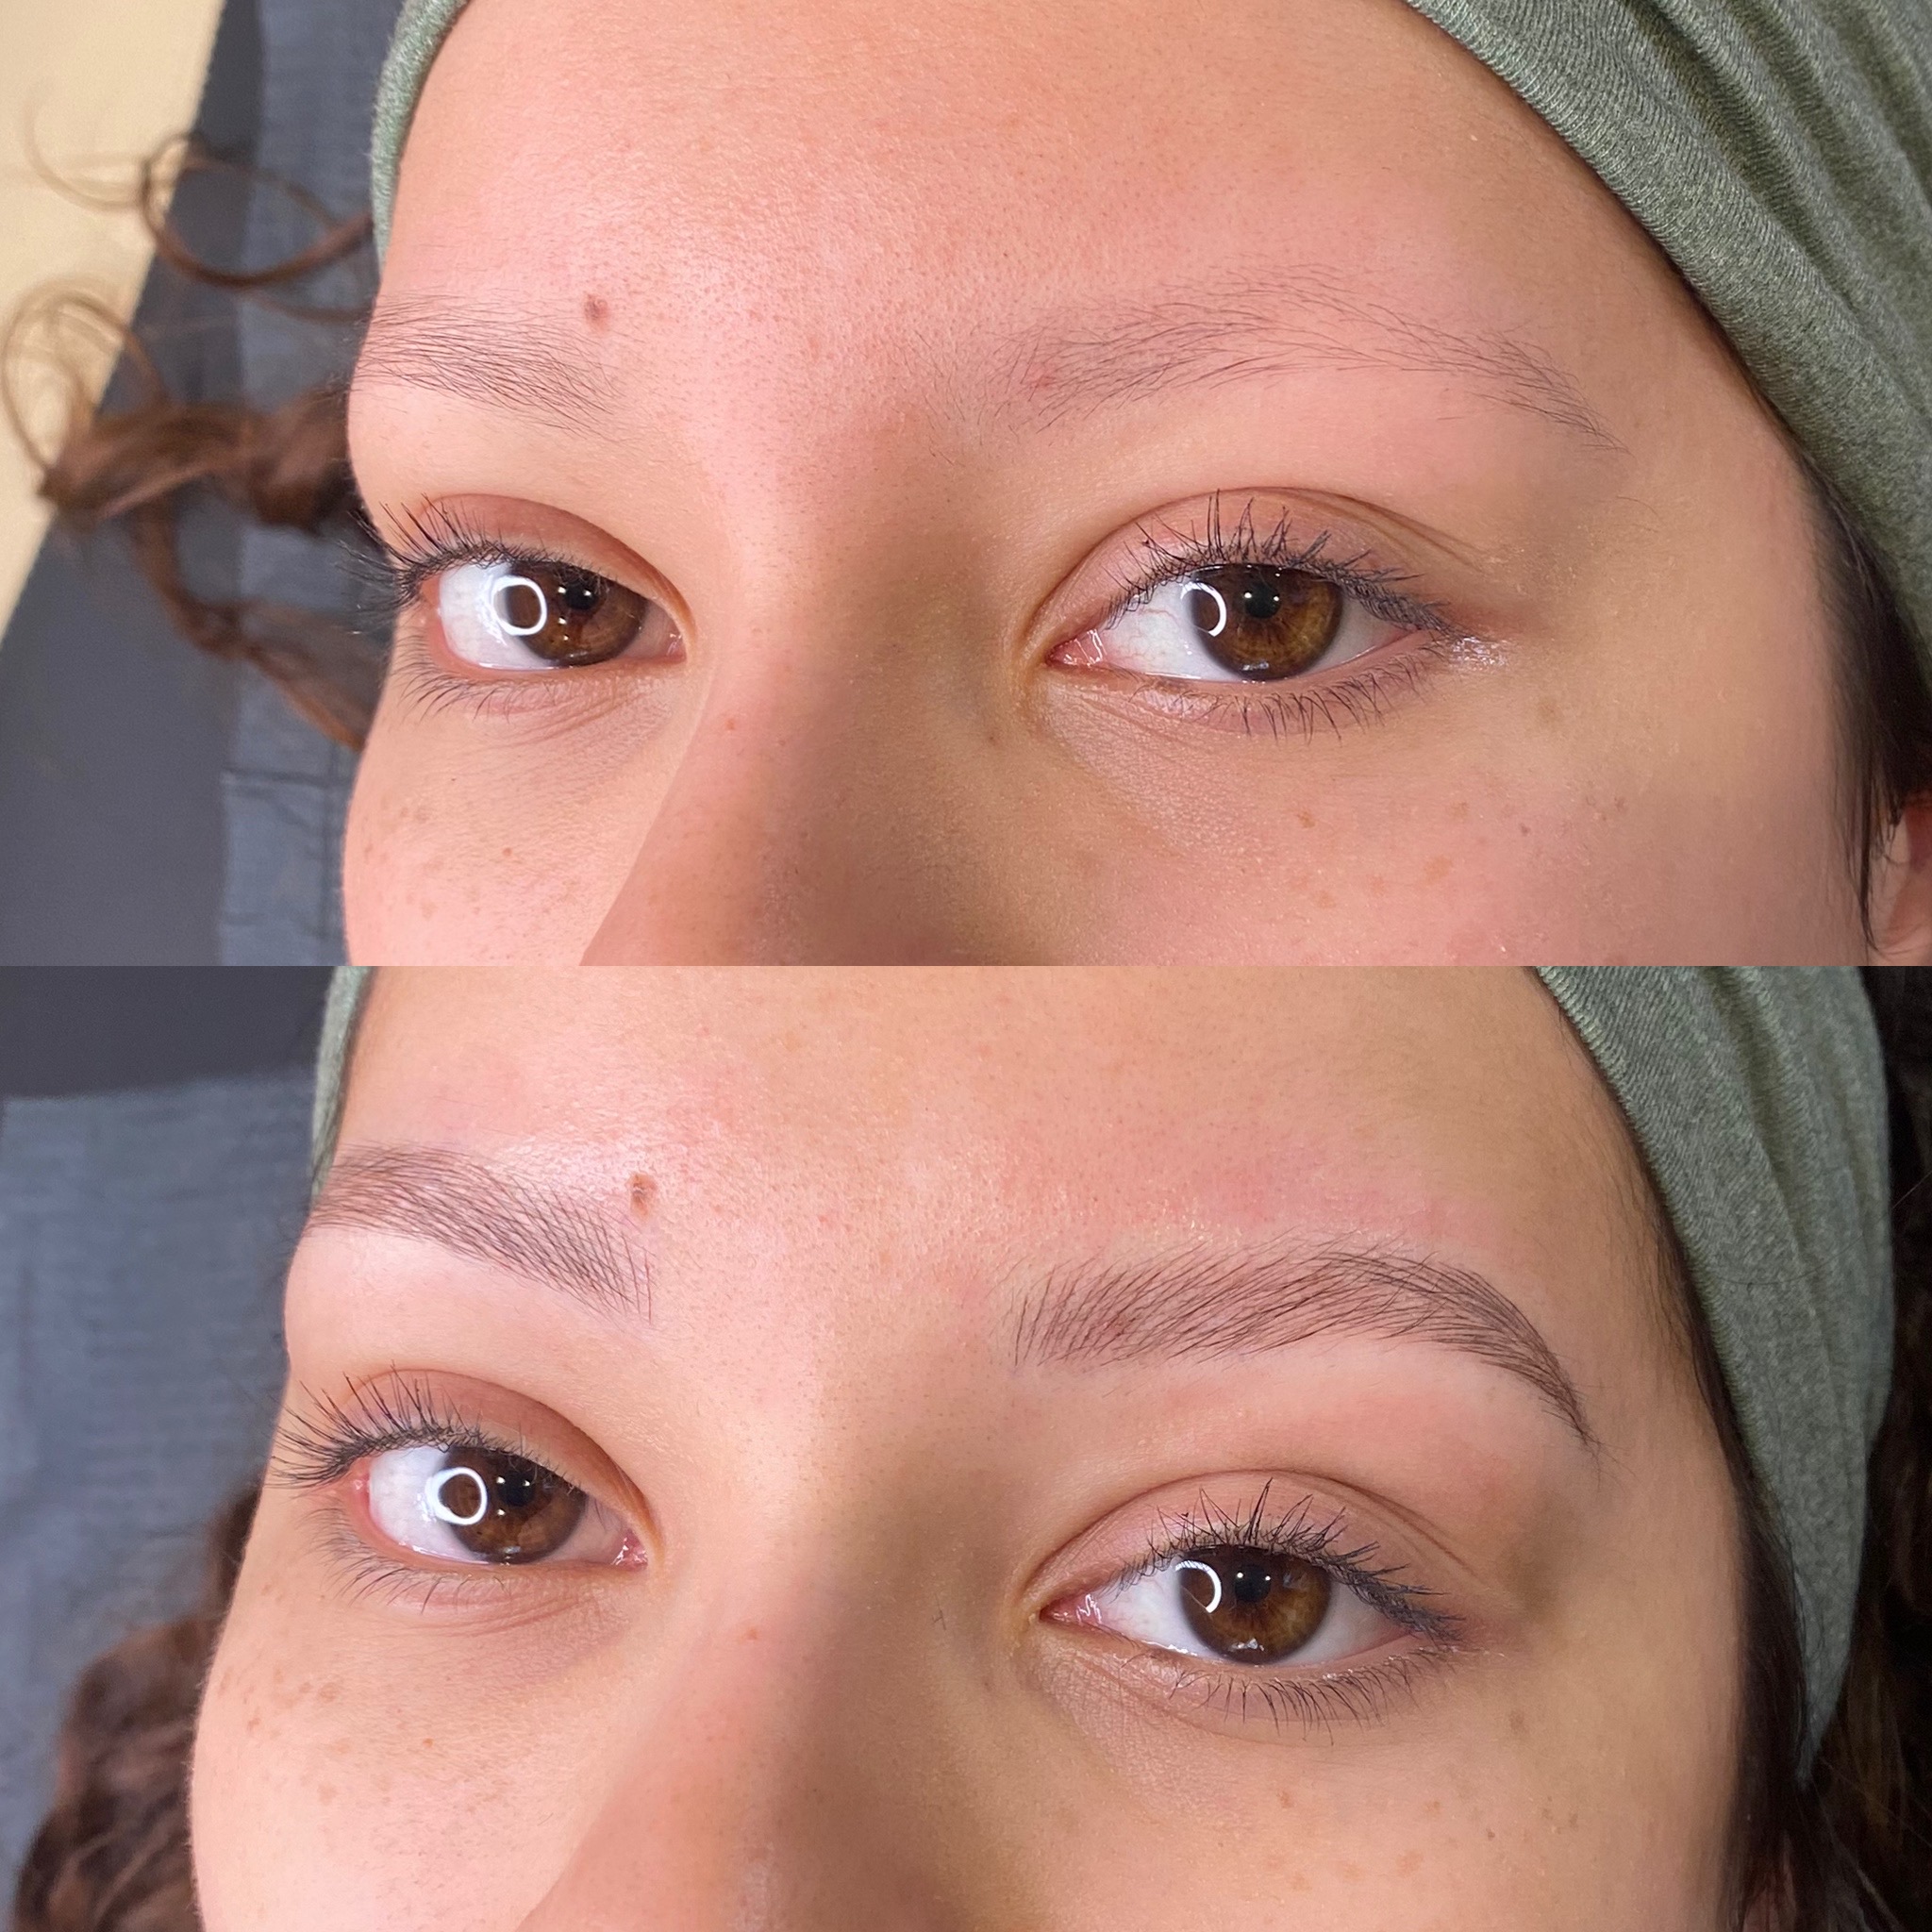 photo of eyebrows with microblading